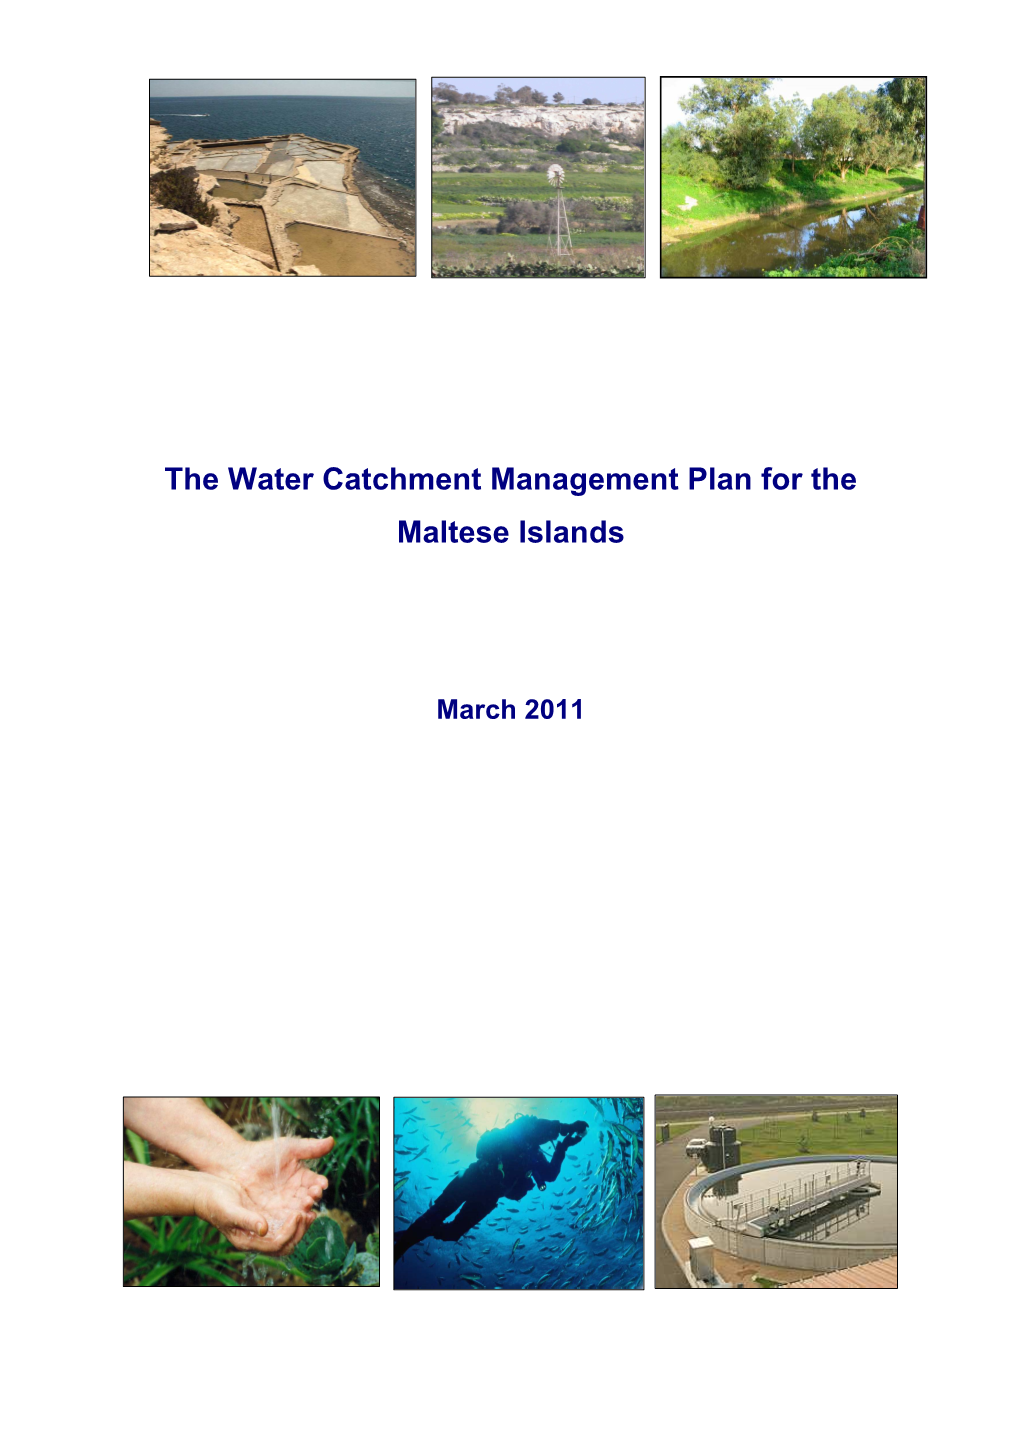 The Water Catchment Management Plan for the Maltese Islands